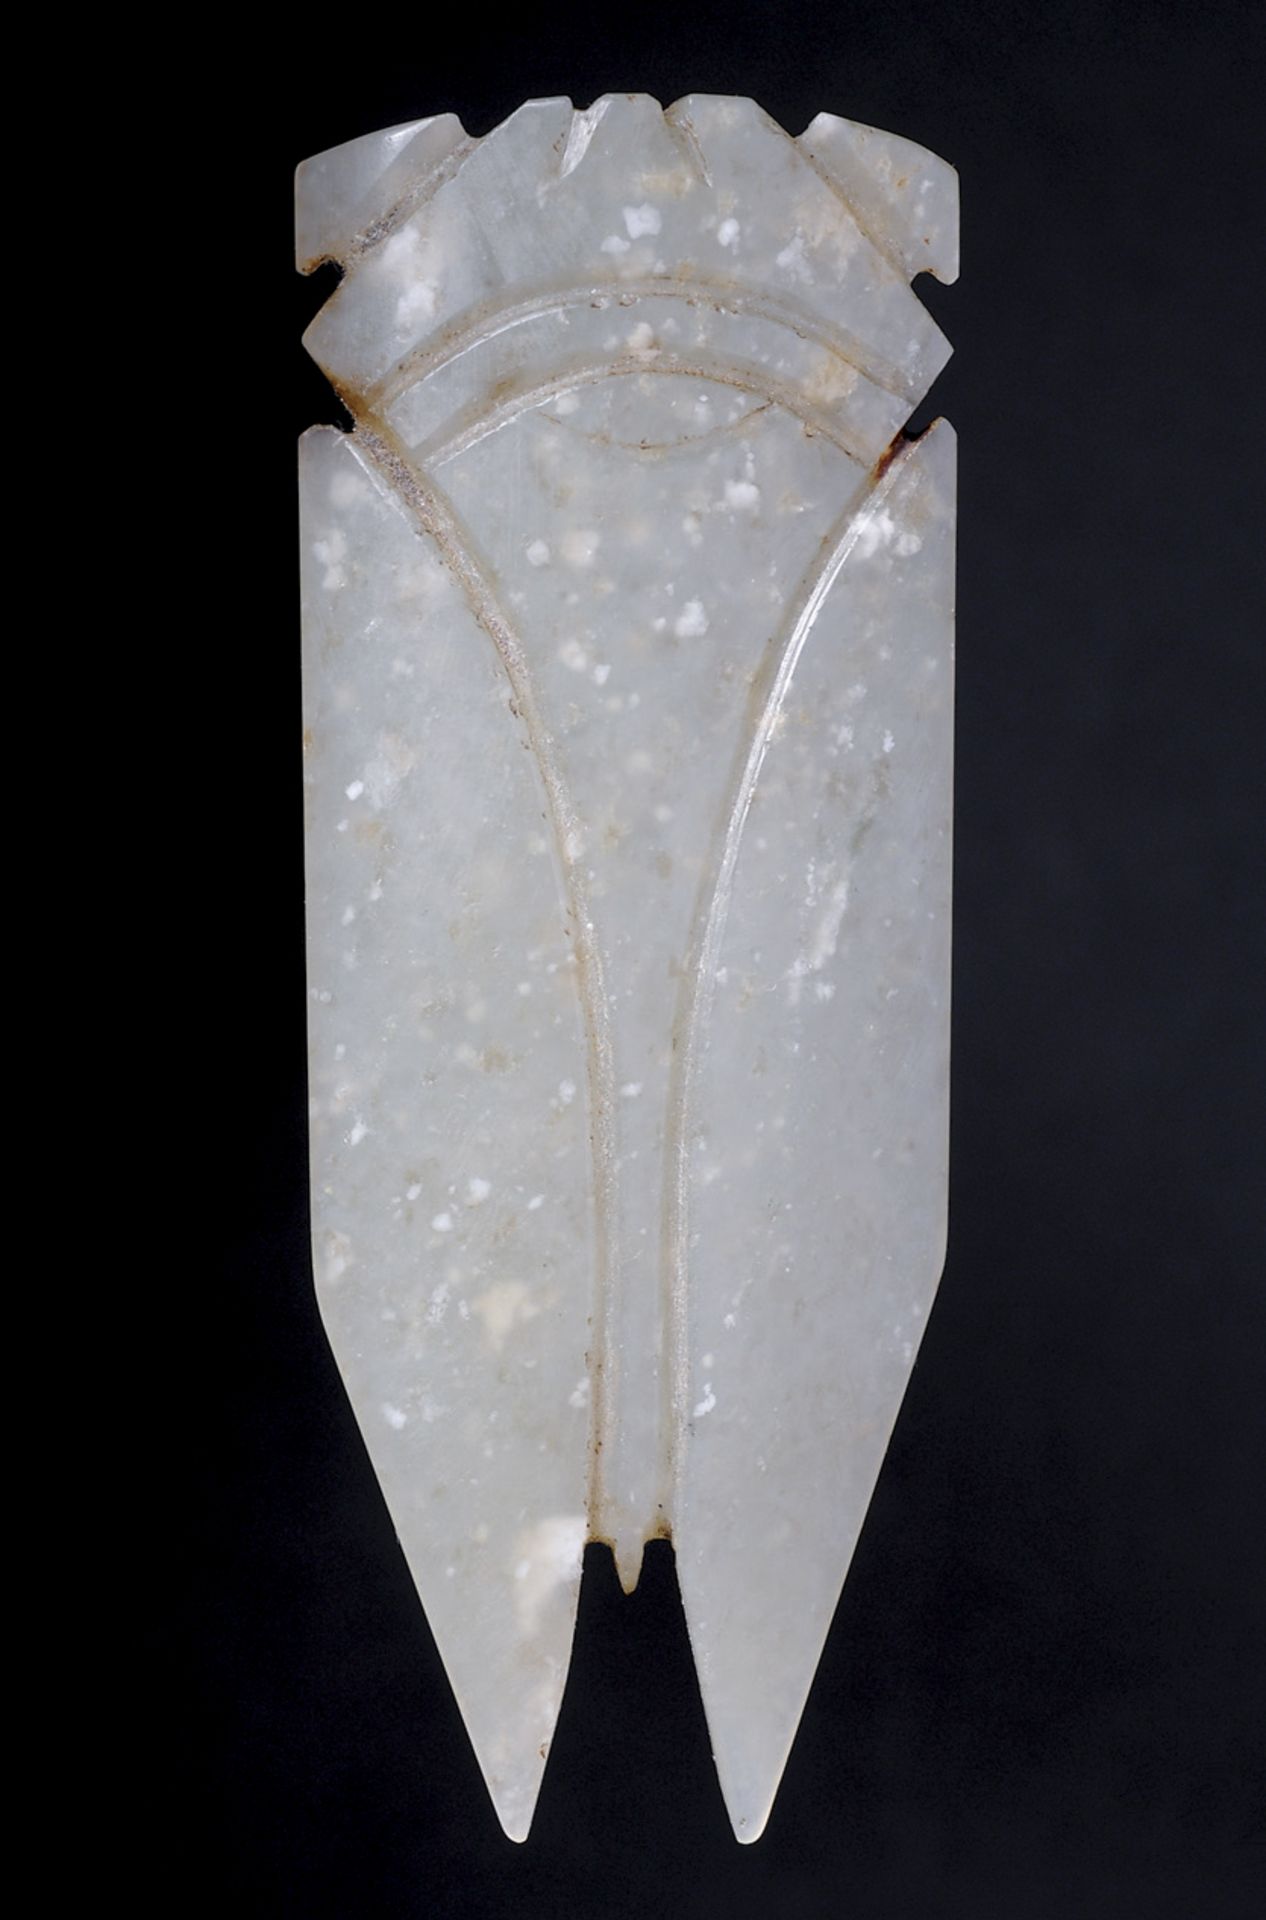 AMULET IN THE SHAPE OF A CICADA  Jade, China, Han period, 206 BC - AD 220  Amulet shaped as stylized